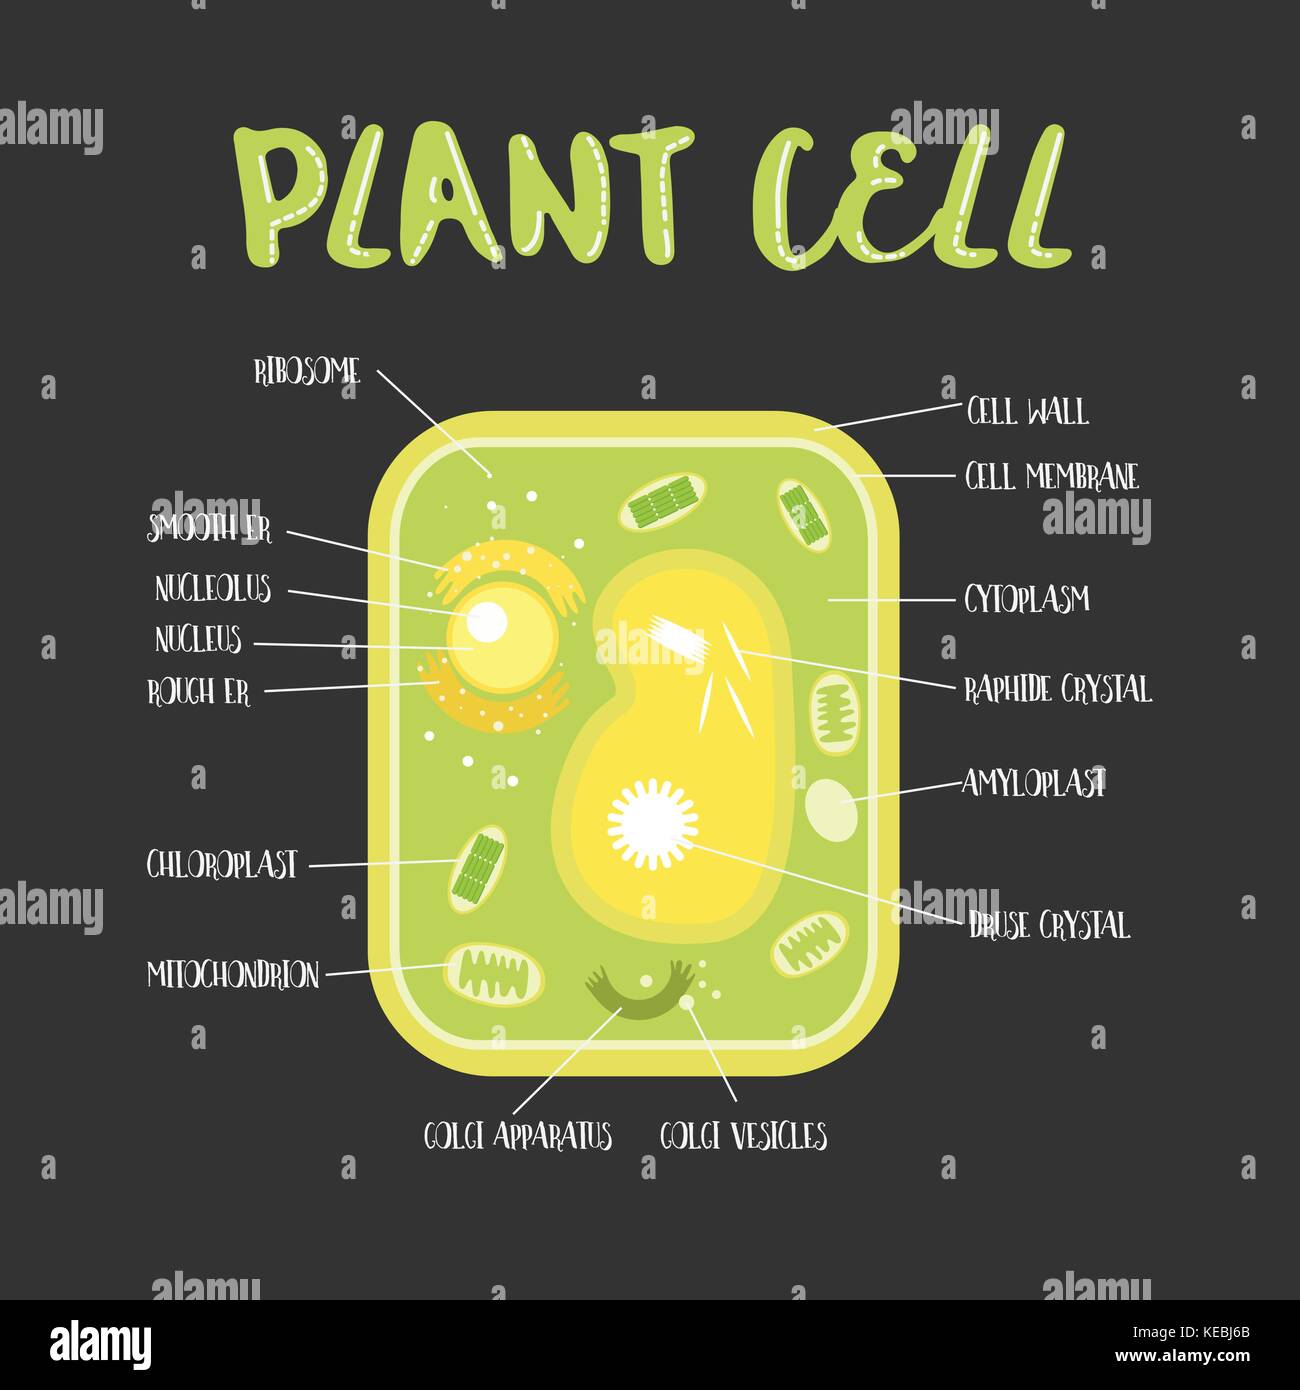 Inside theplant cell structure illustration vector Stock Vector